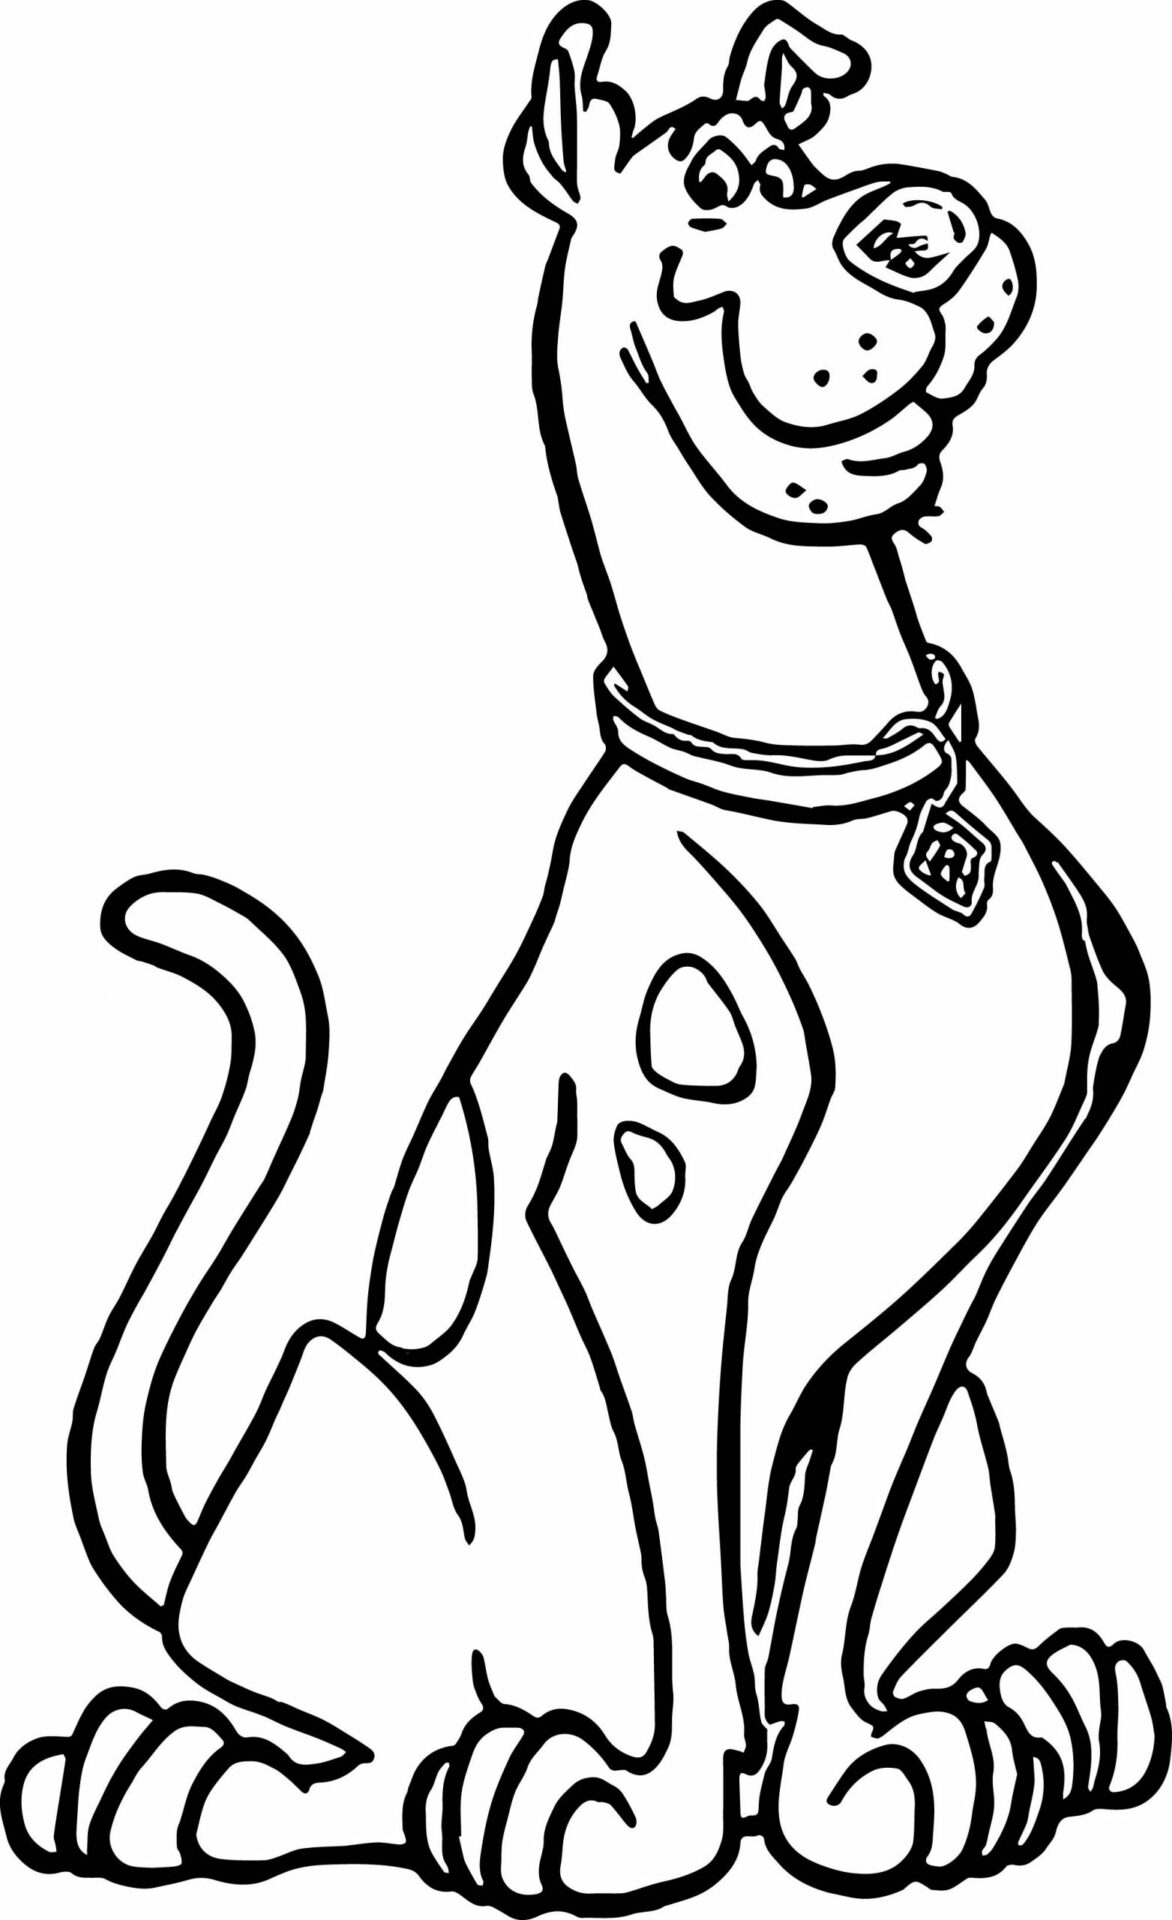 Scooby Doo Coloring Pages - Free Printable Coloring Pages for Kids